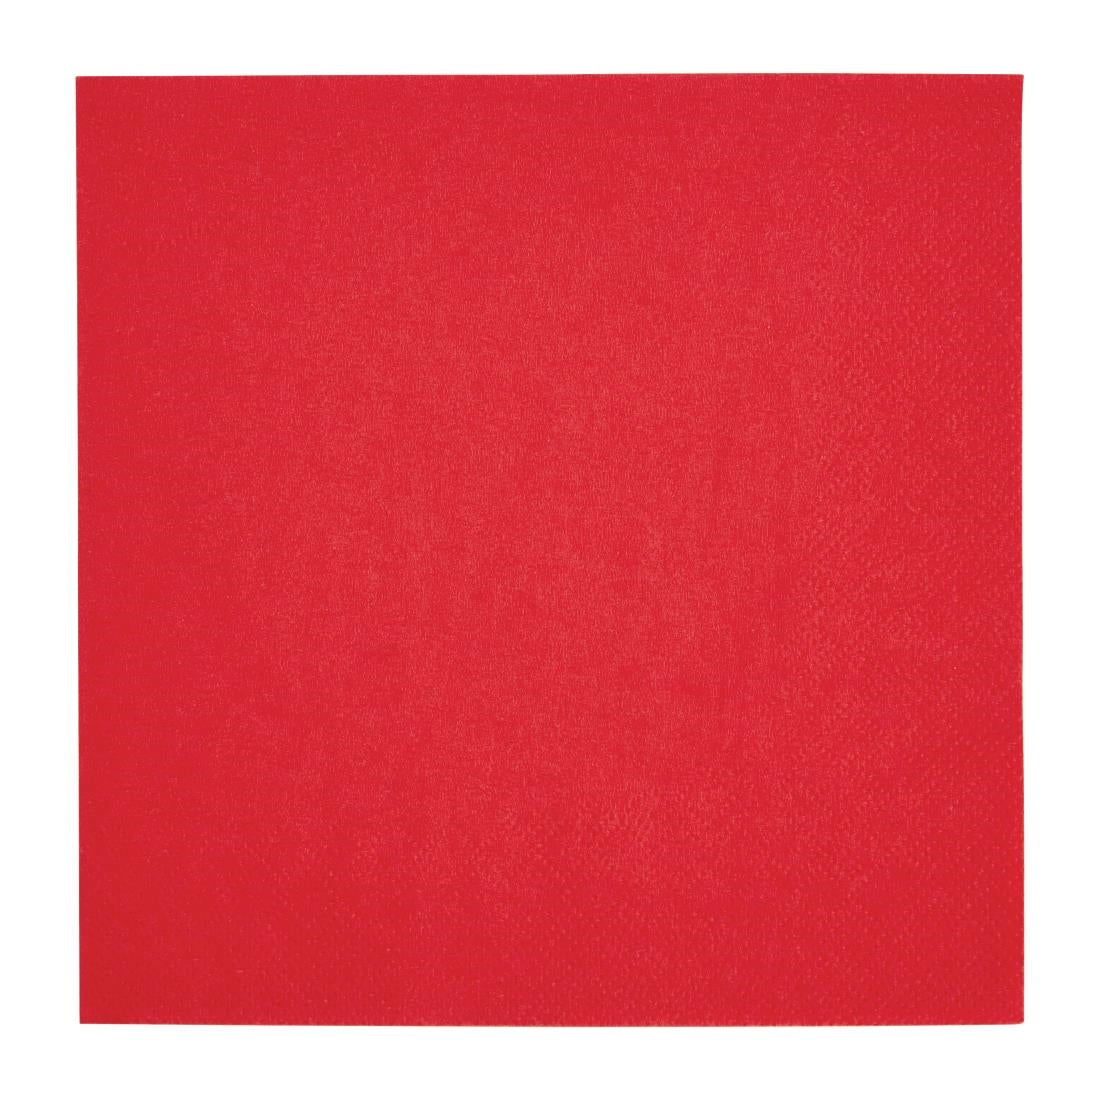 FE222 Fiesta Recyclable Lunch Napkin Red 33x33cm 2ply 1/4 Fold (Pack of 2000) JD Catering Equipment Solutions Ltd